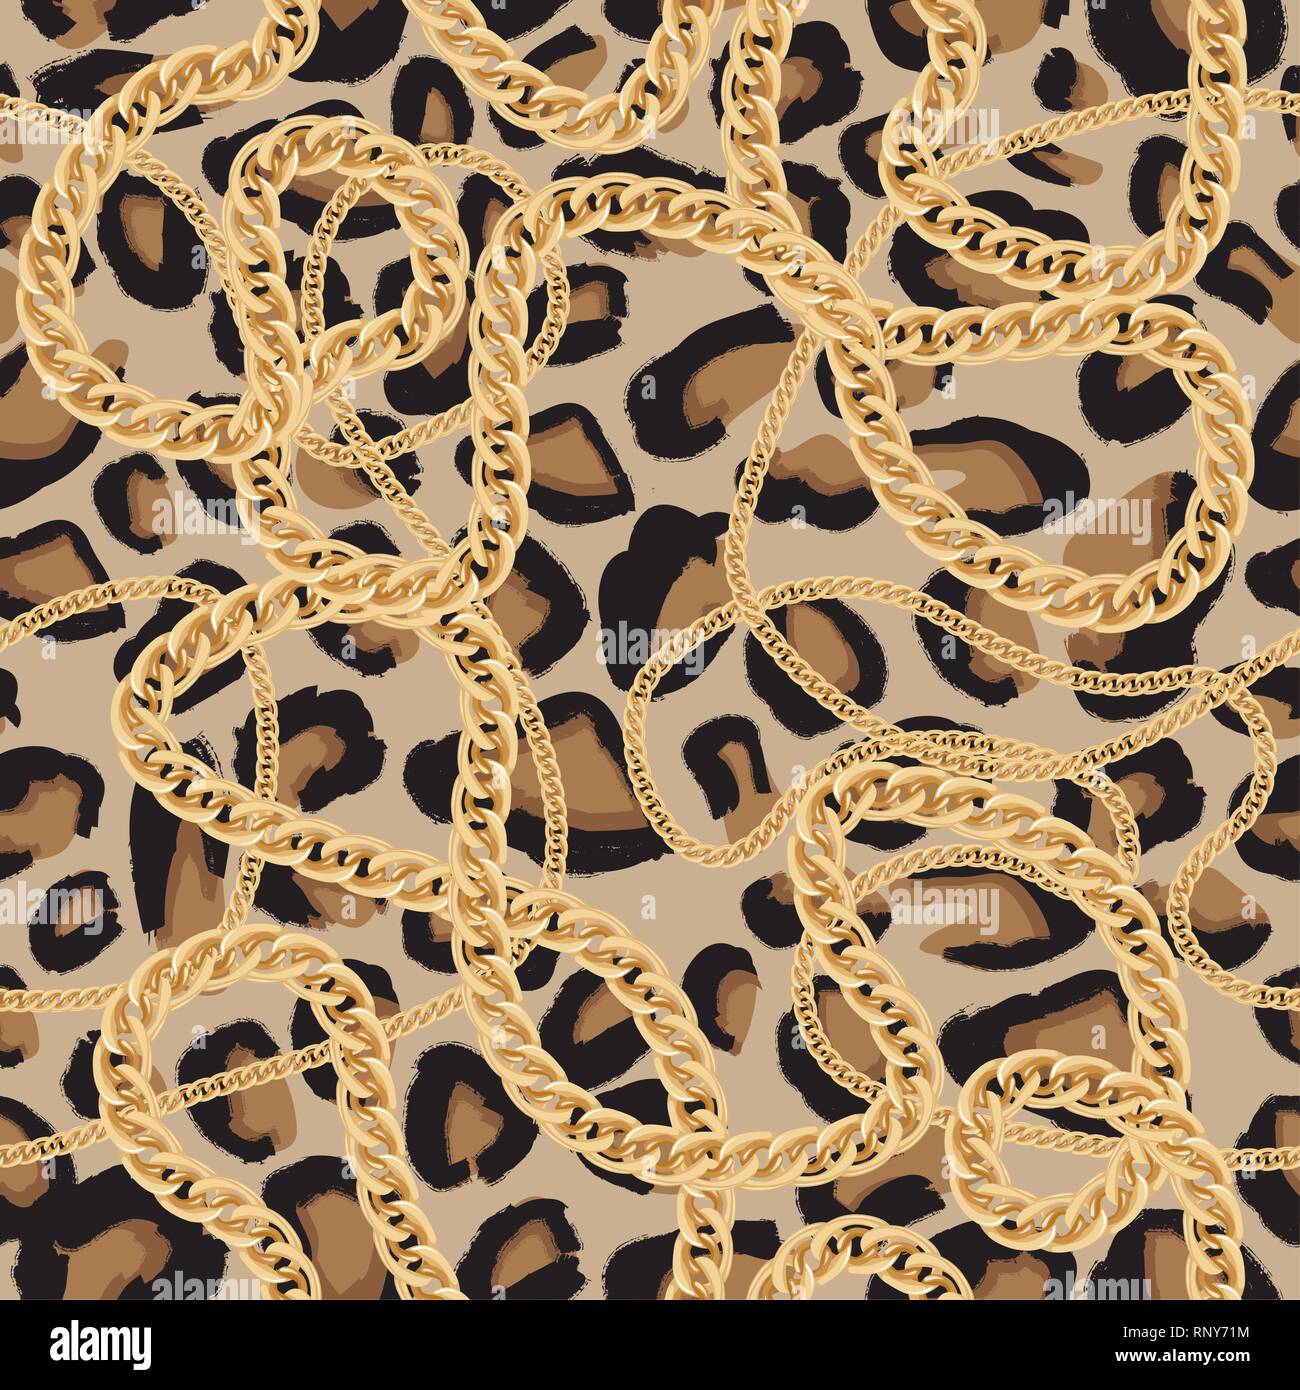 Leopard Seamless Pattern with Golden Chain. Vector Illustration. Animal Print. Stock Vector